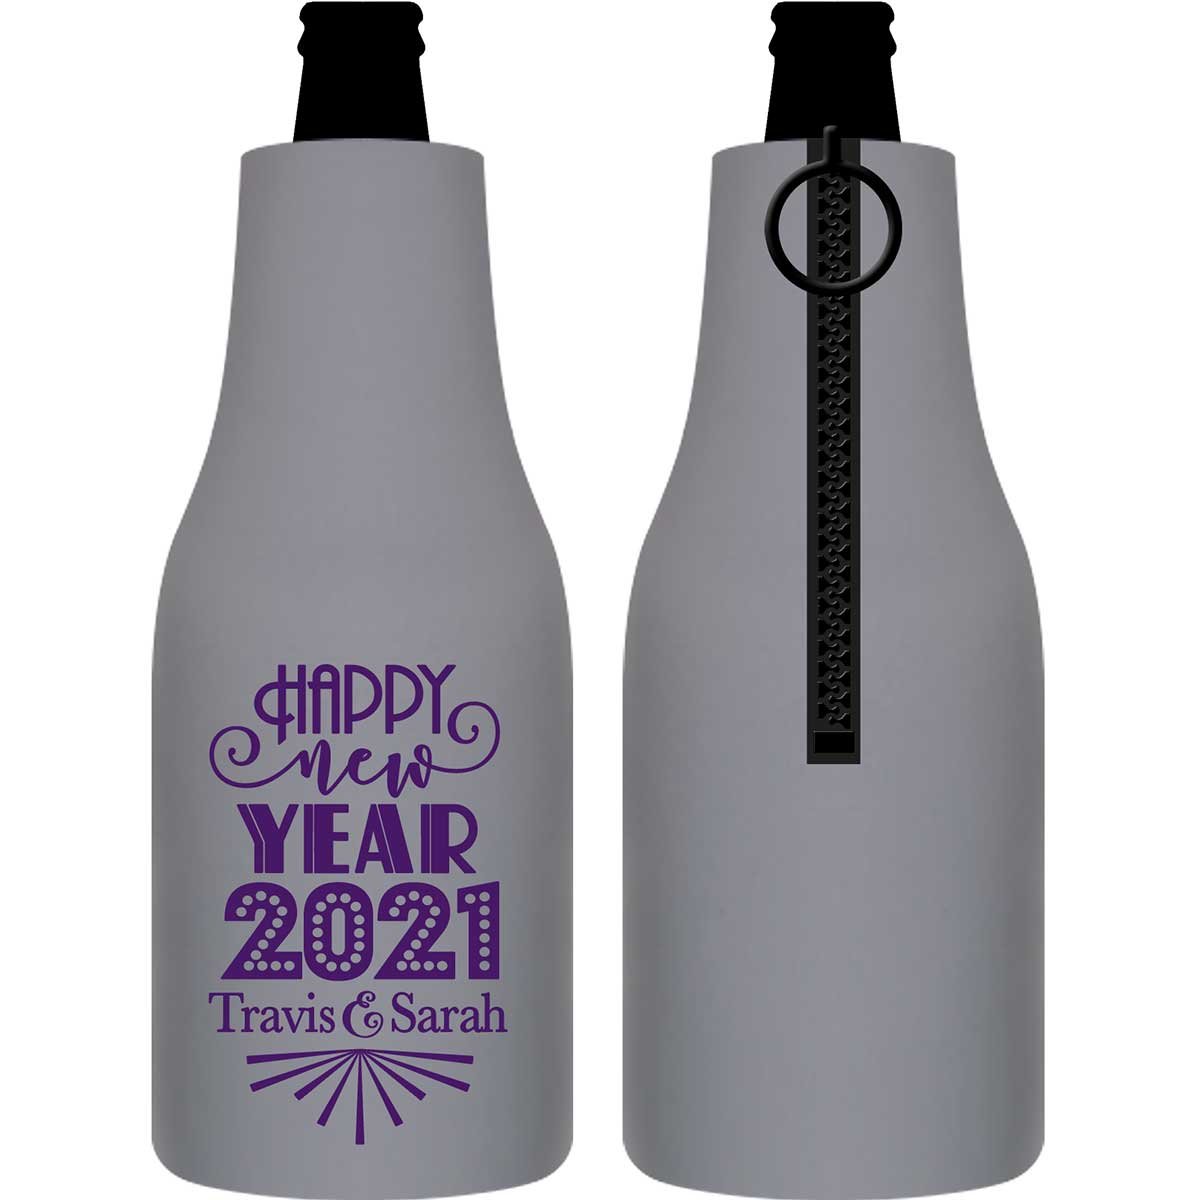 Happy New Year 1A Foldable Zippered Bottle Koozies Wedding Gifts for Guests